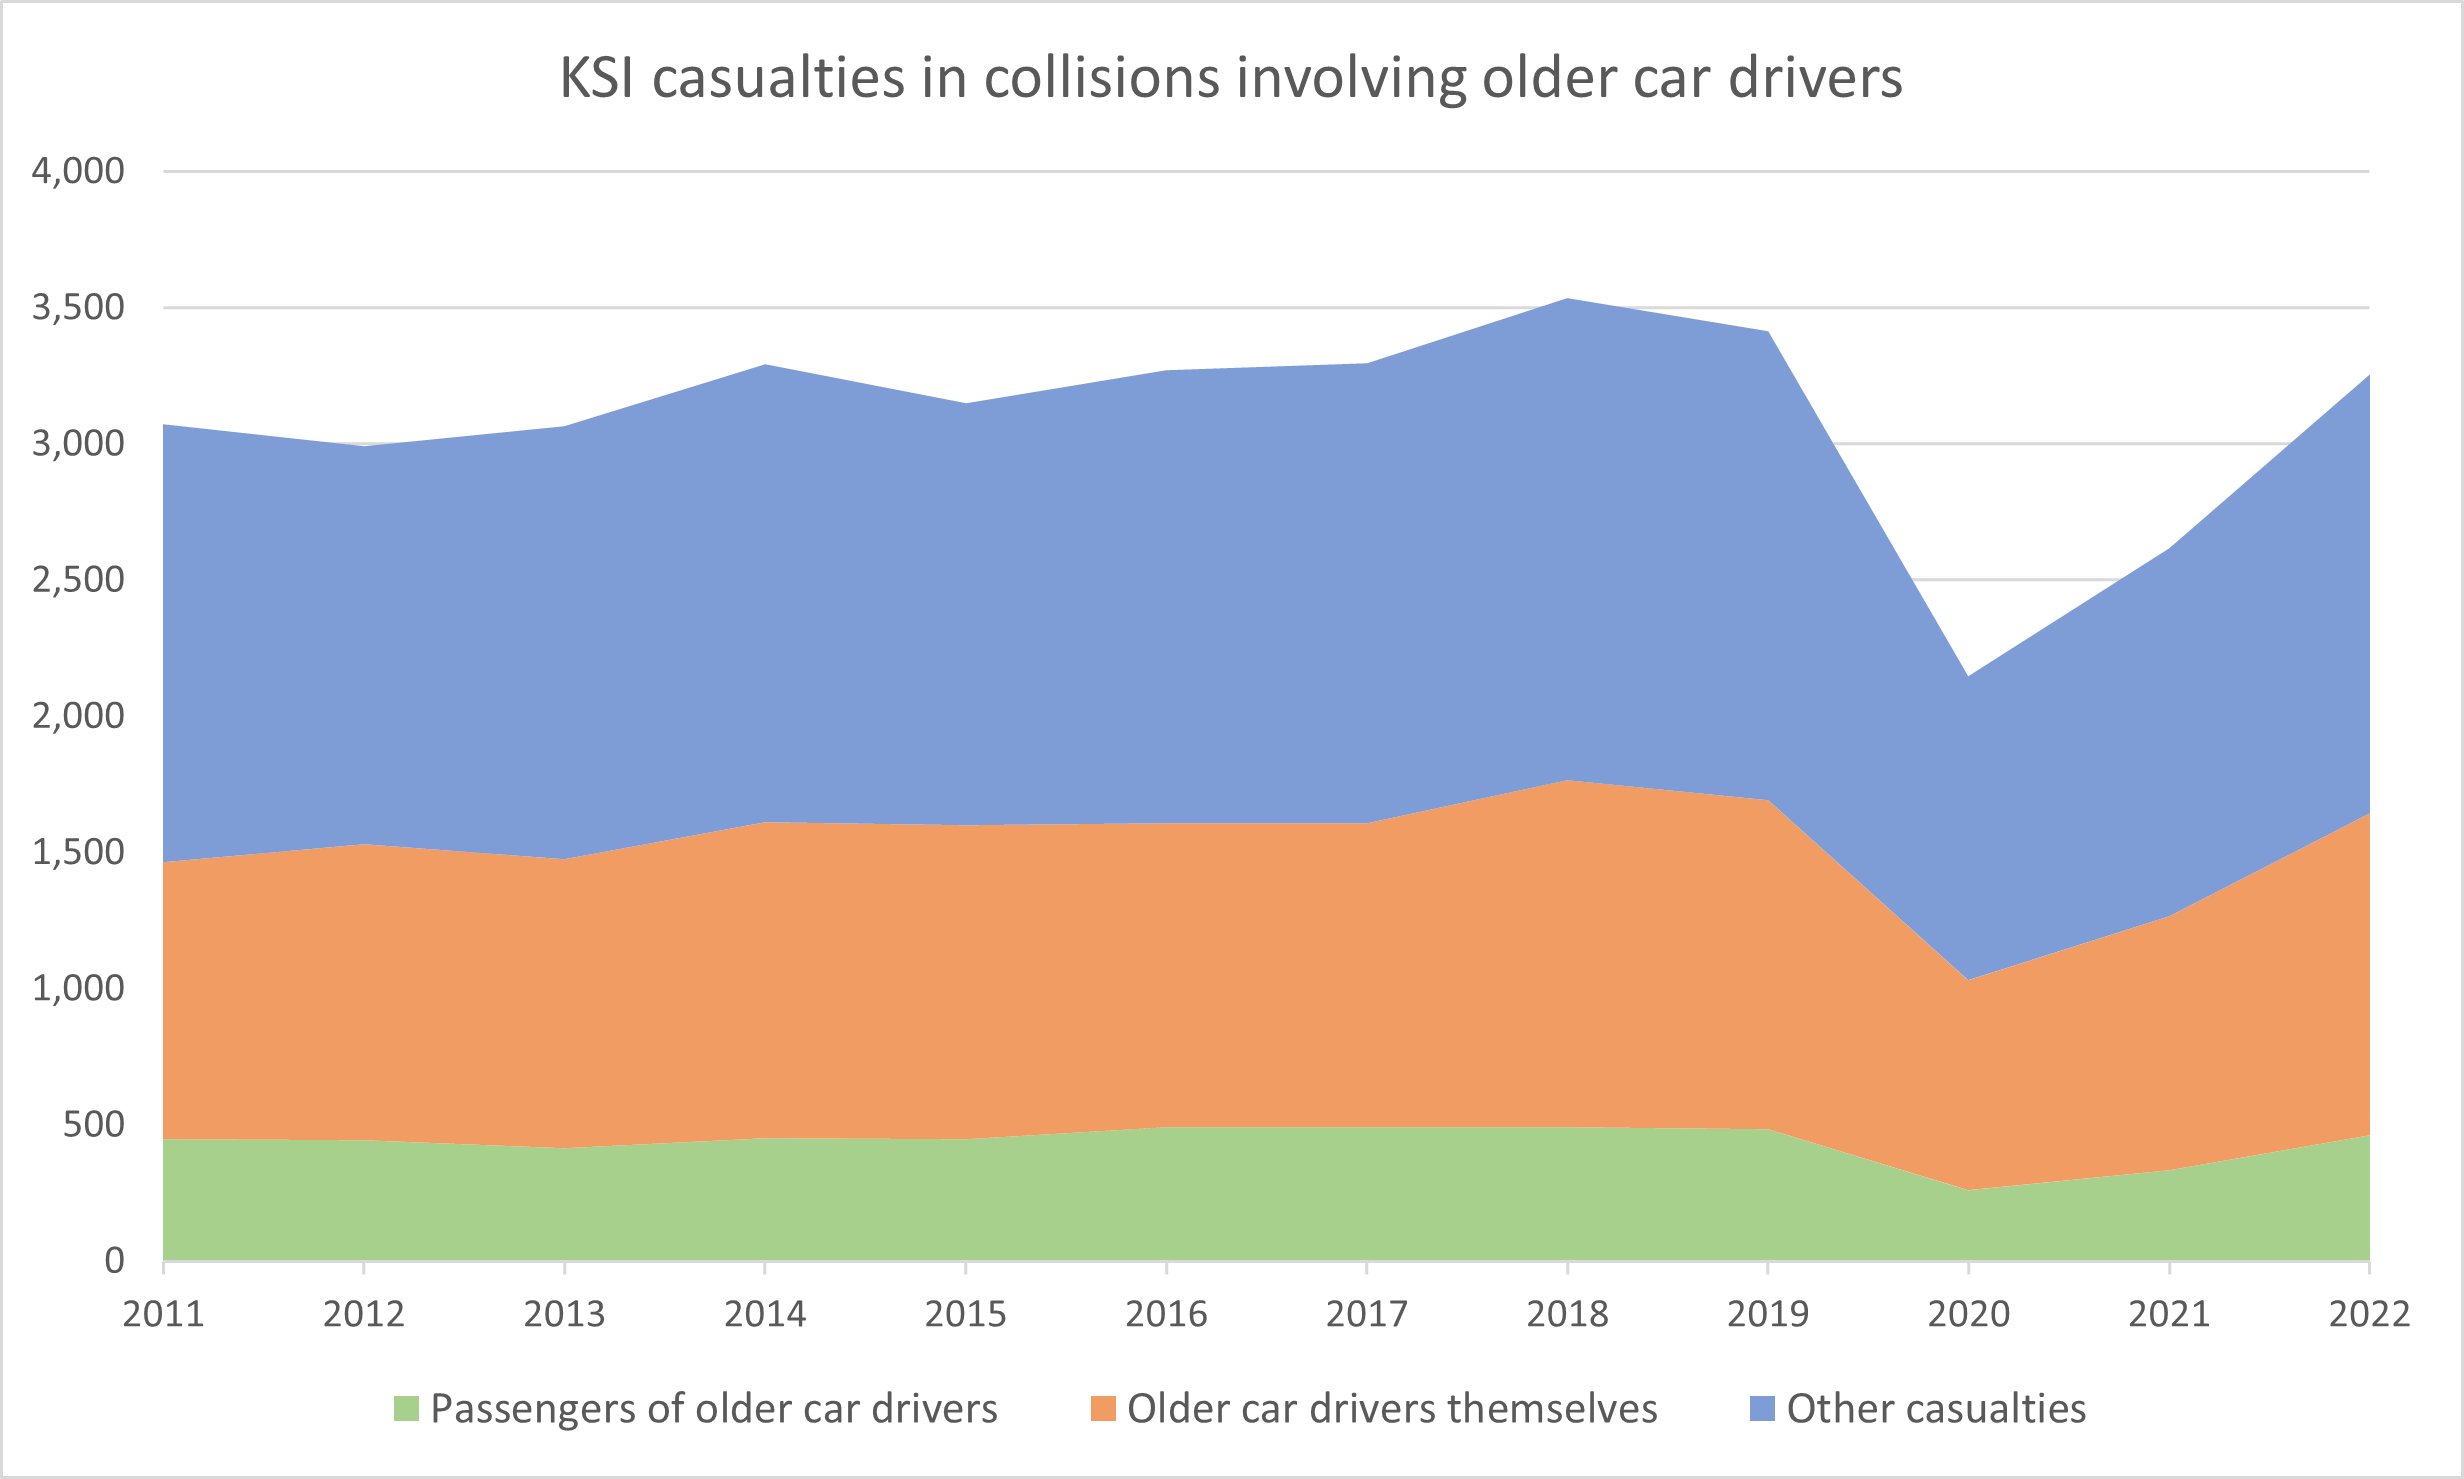 Casualties from older car drivers